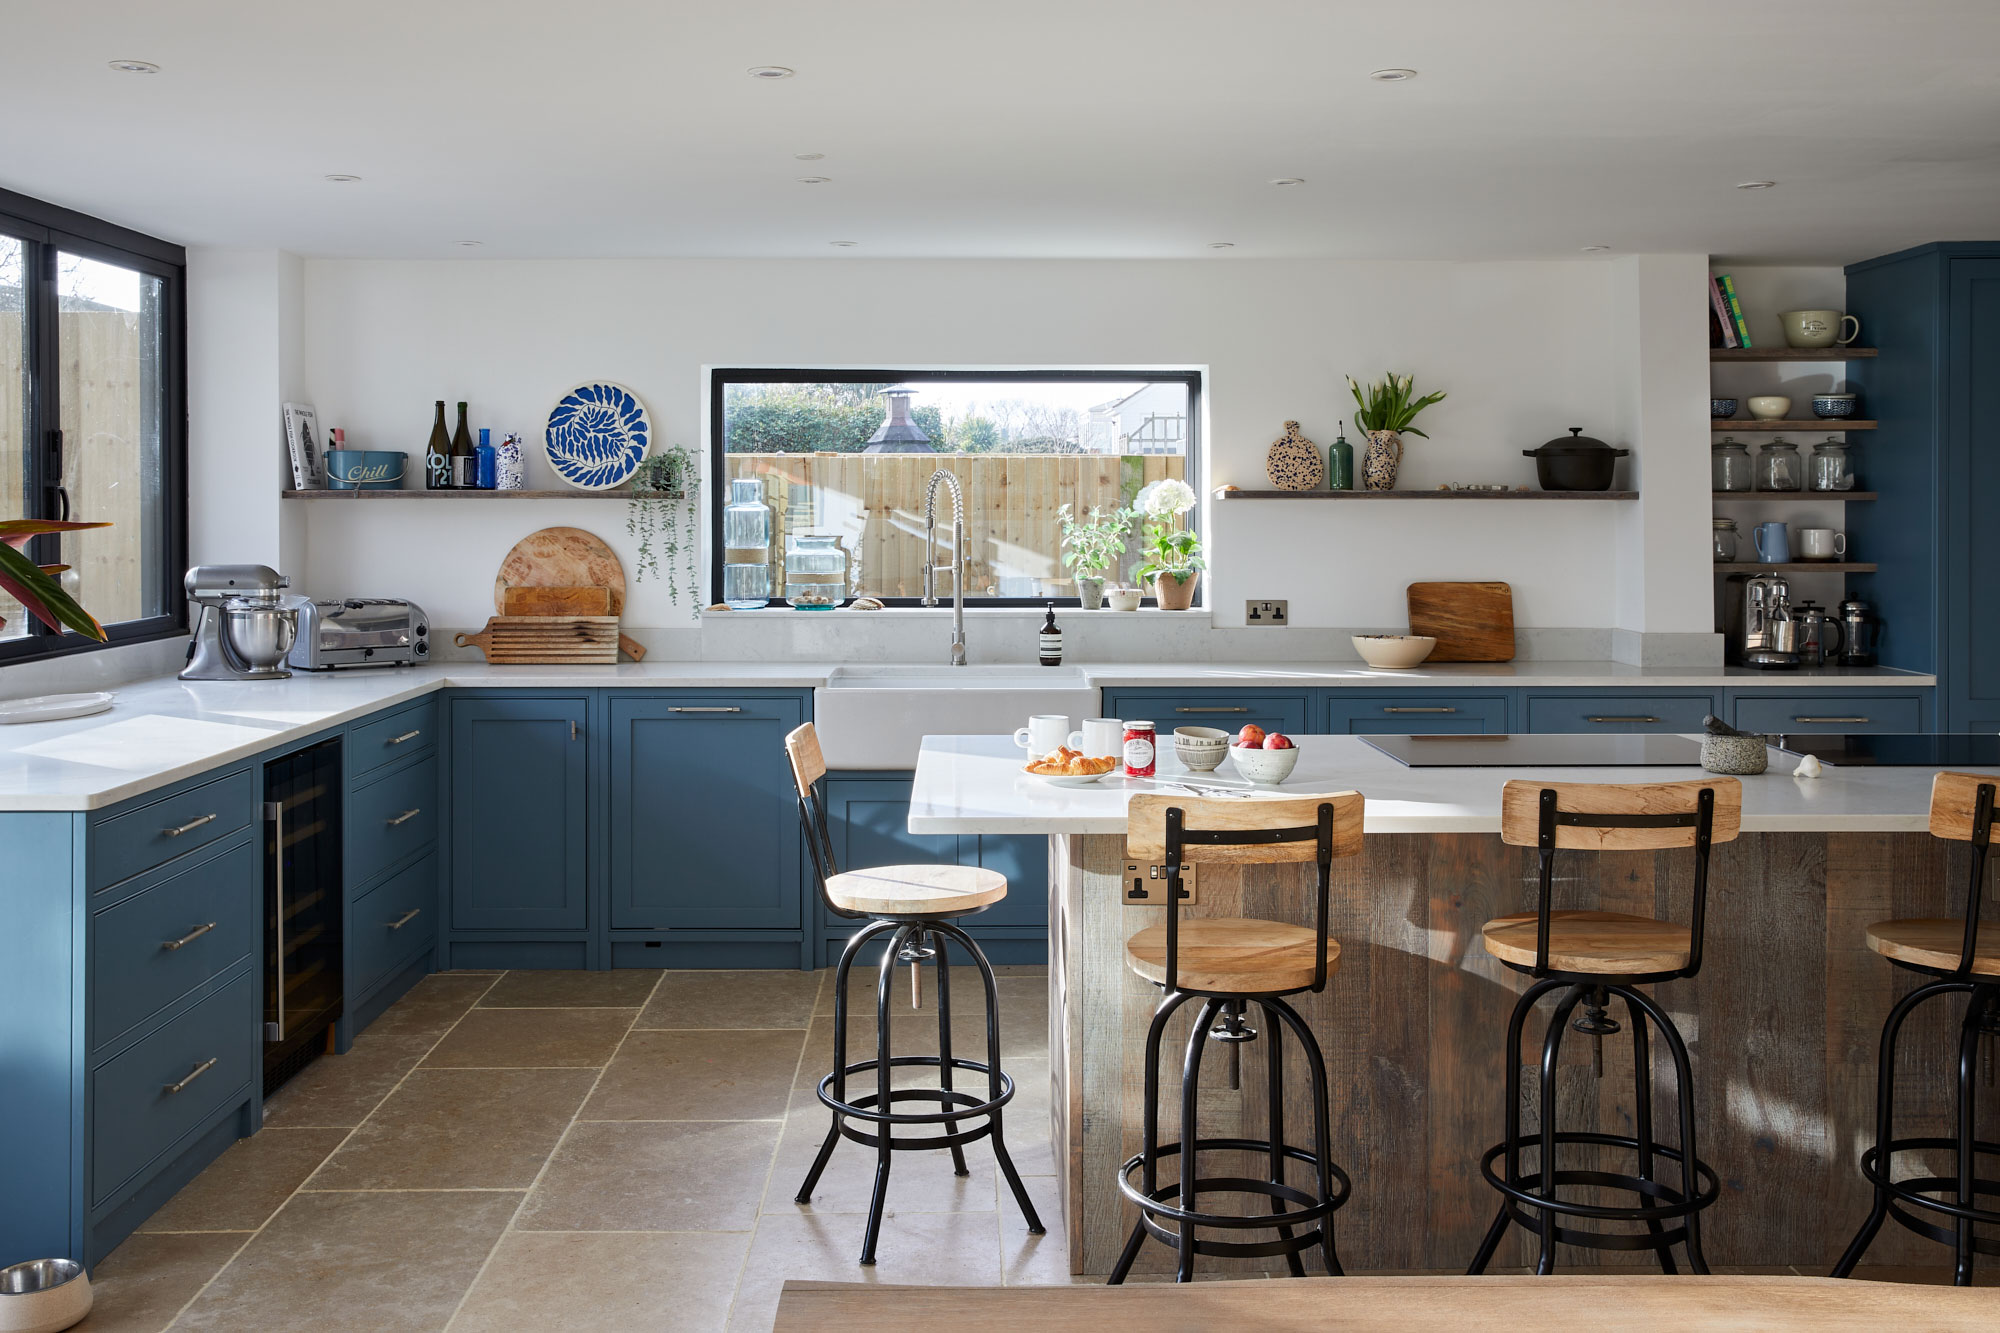 Mixing materials in a bespoke kitchen